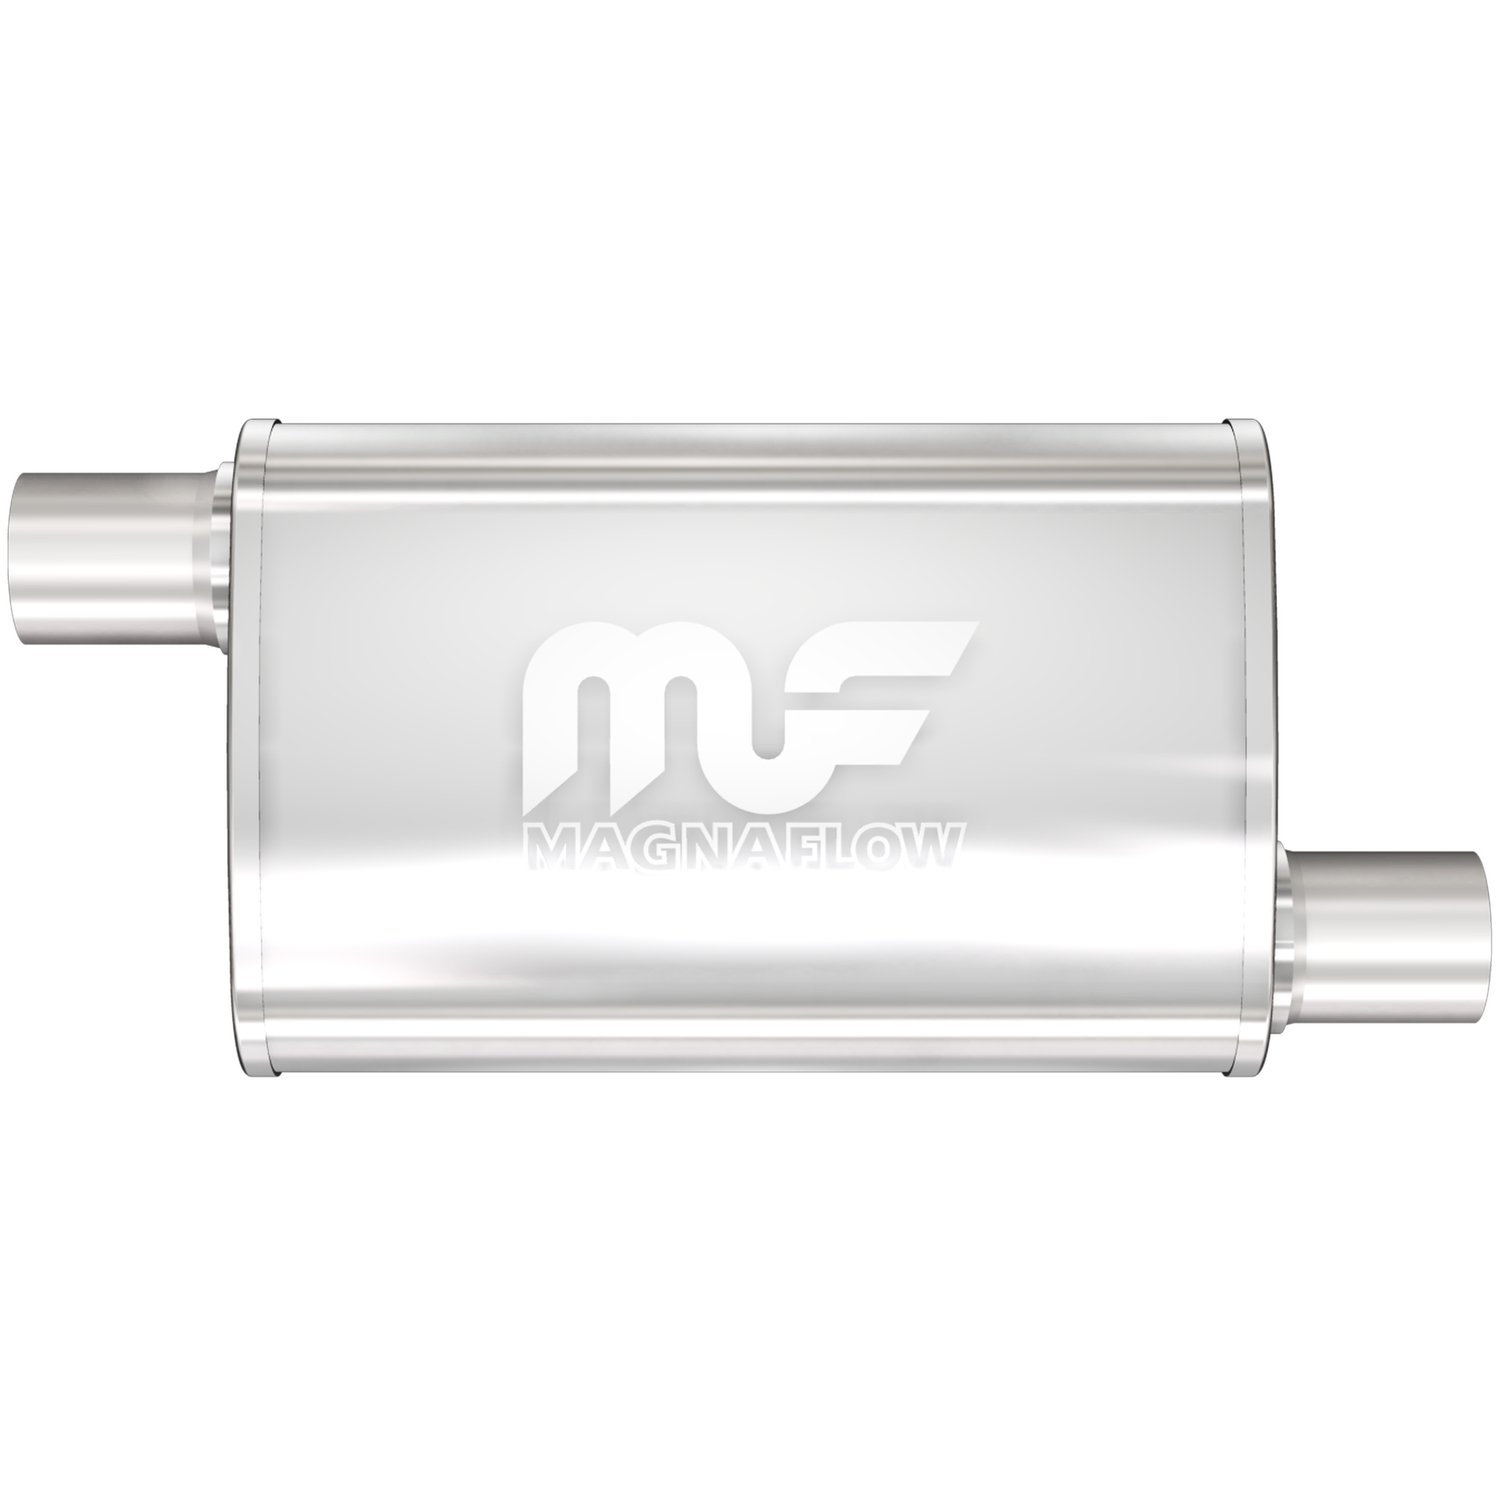 3.5" x 7" Oval Muffler Offset In/Offset Out: 2"/2.25" Body Length: 11" Overall Length: 17" Core Size: 2" Satin Finish